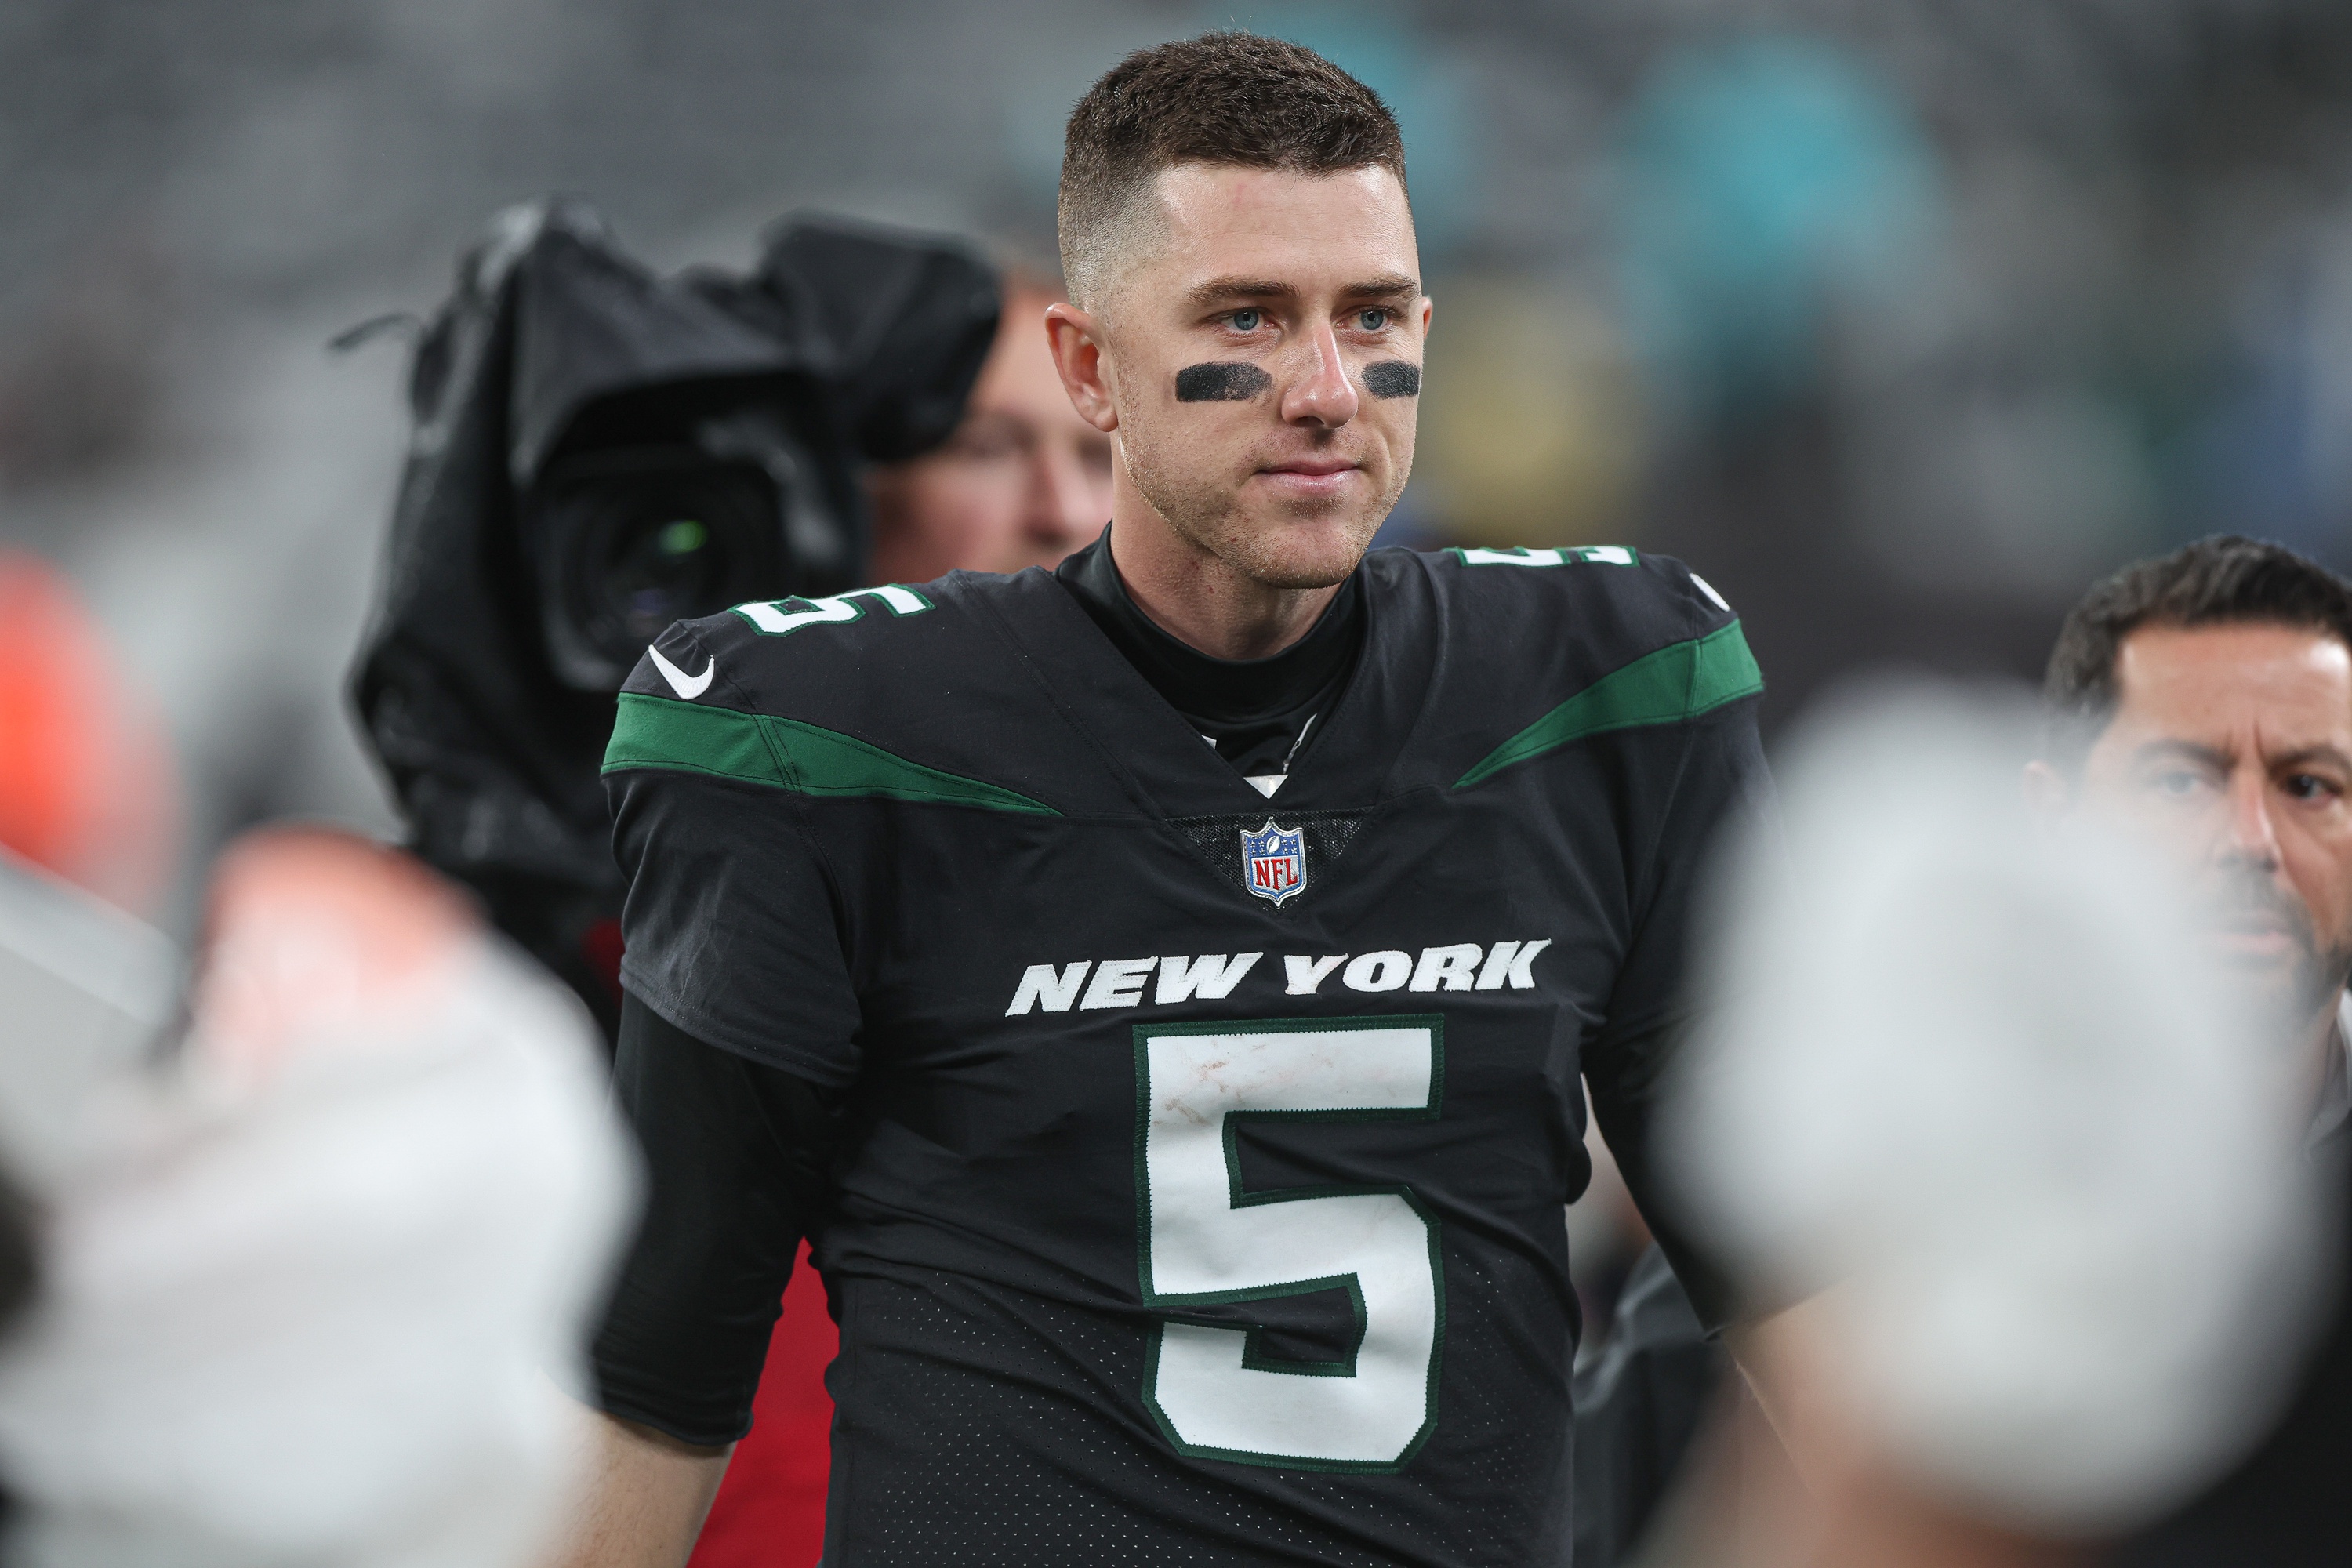 Mike White led the NY Jets to victory in Week 12 against the Bears